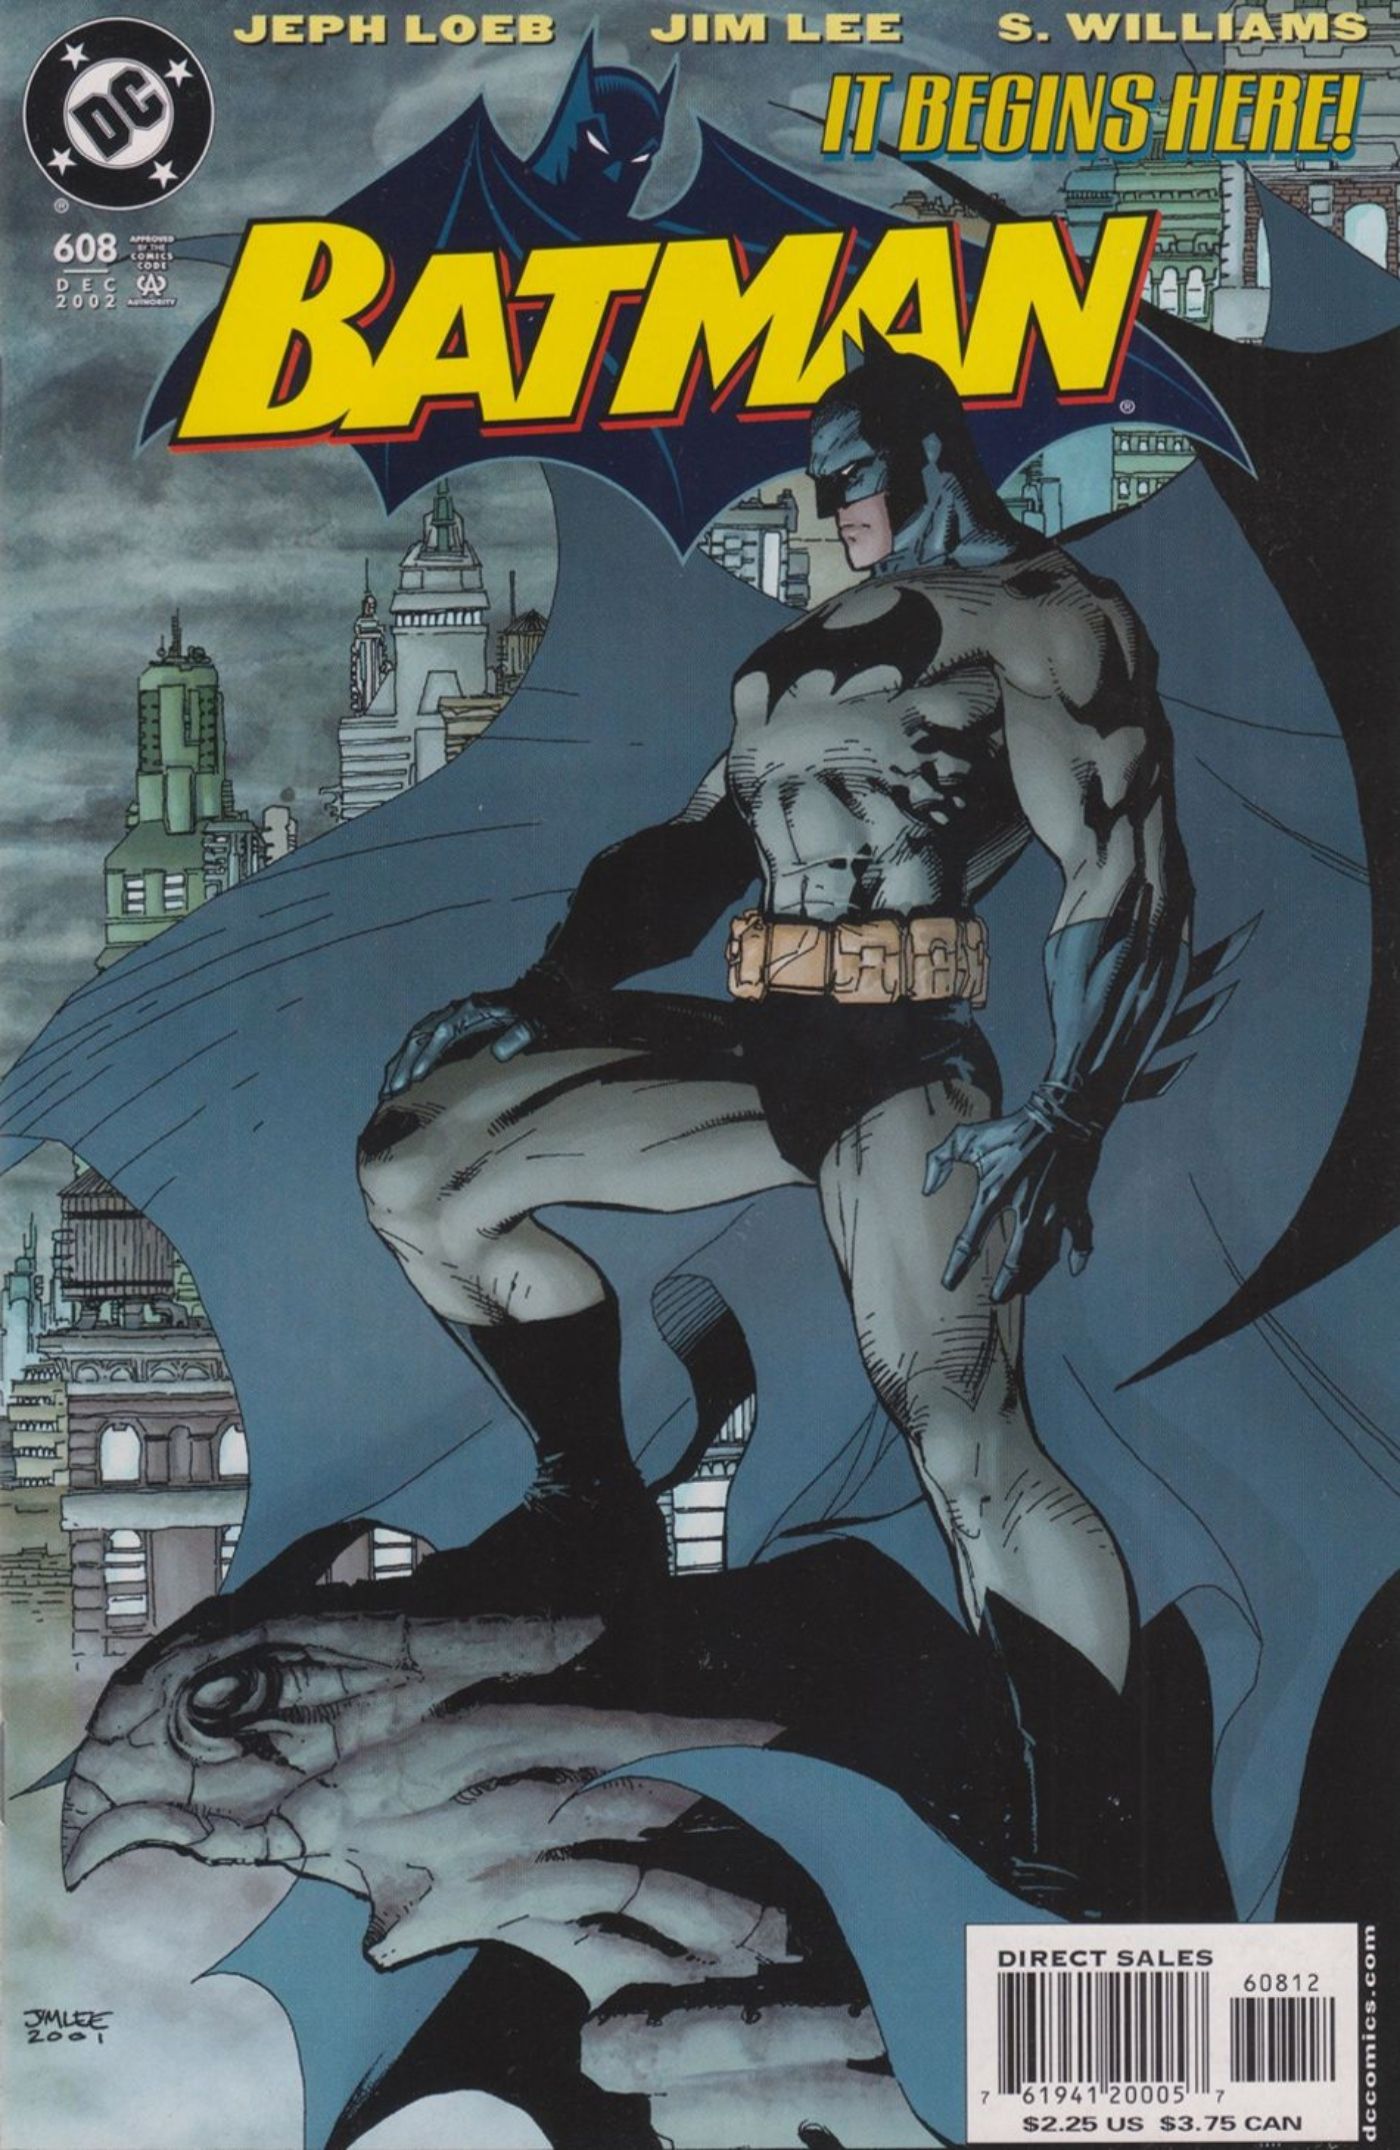 Batman watching over Gotham on a comic cover.